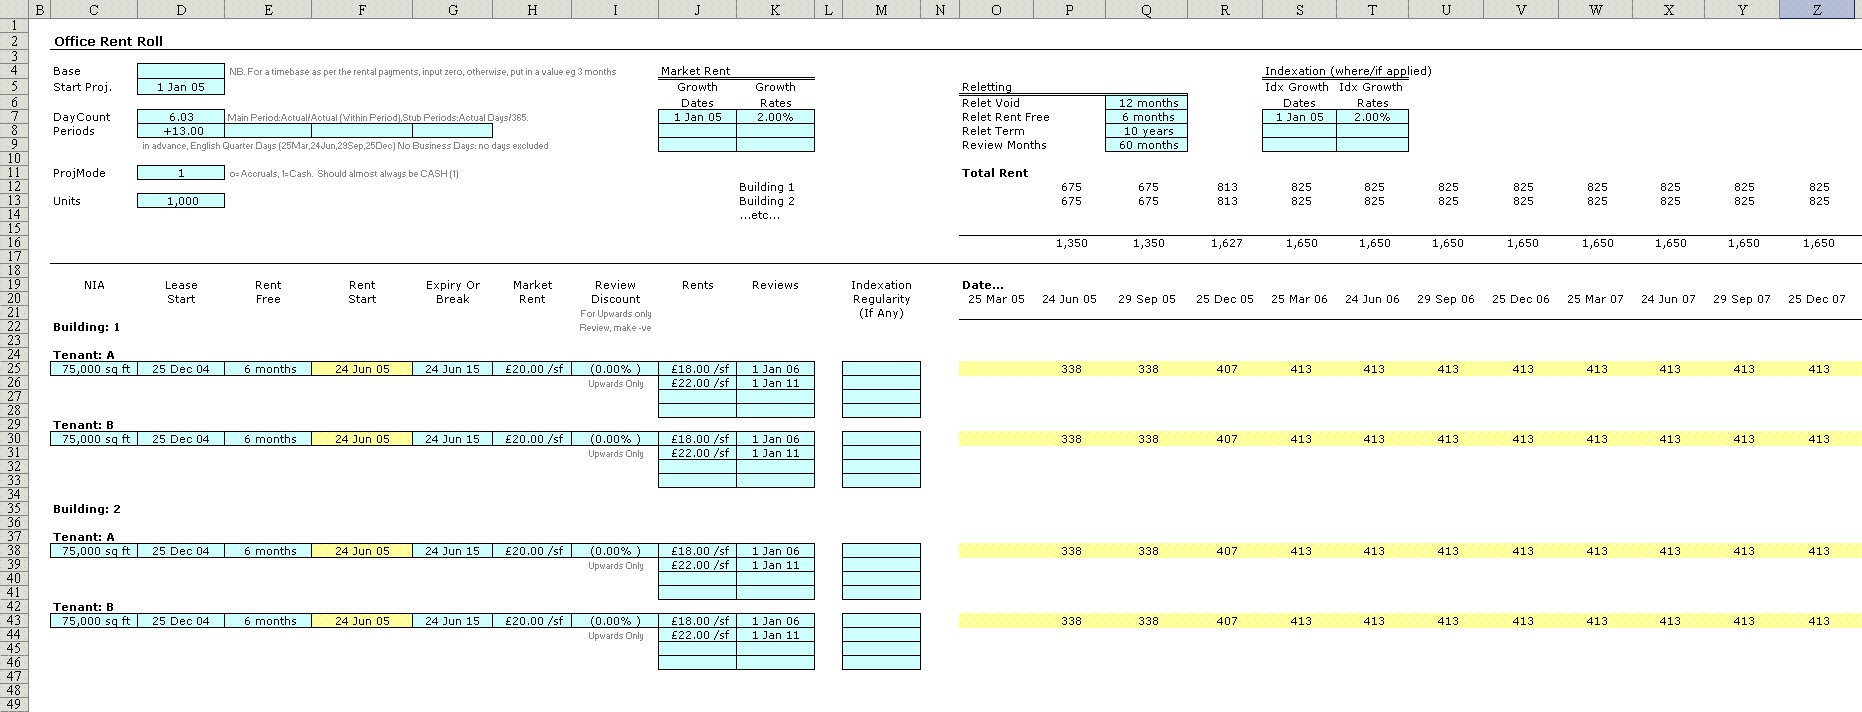 Business Functions Library For Excel Document Rent Roll Spreadsheet Example